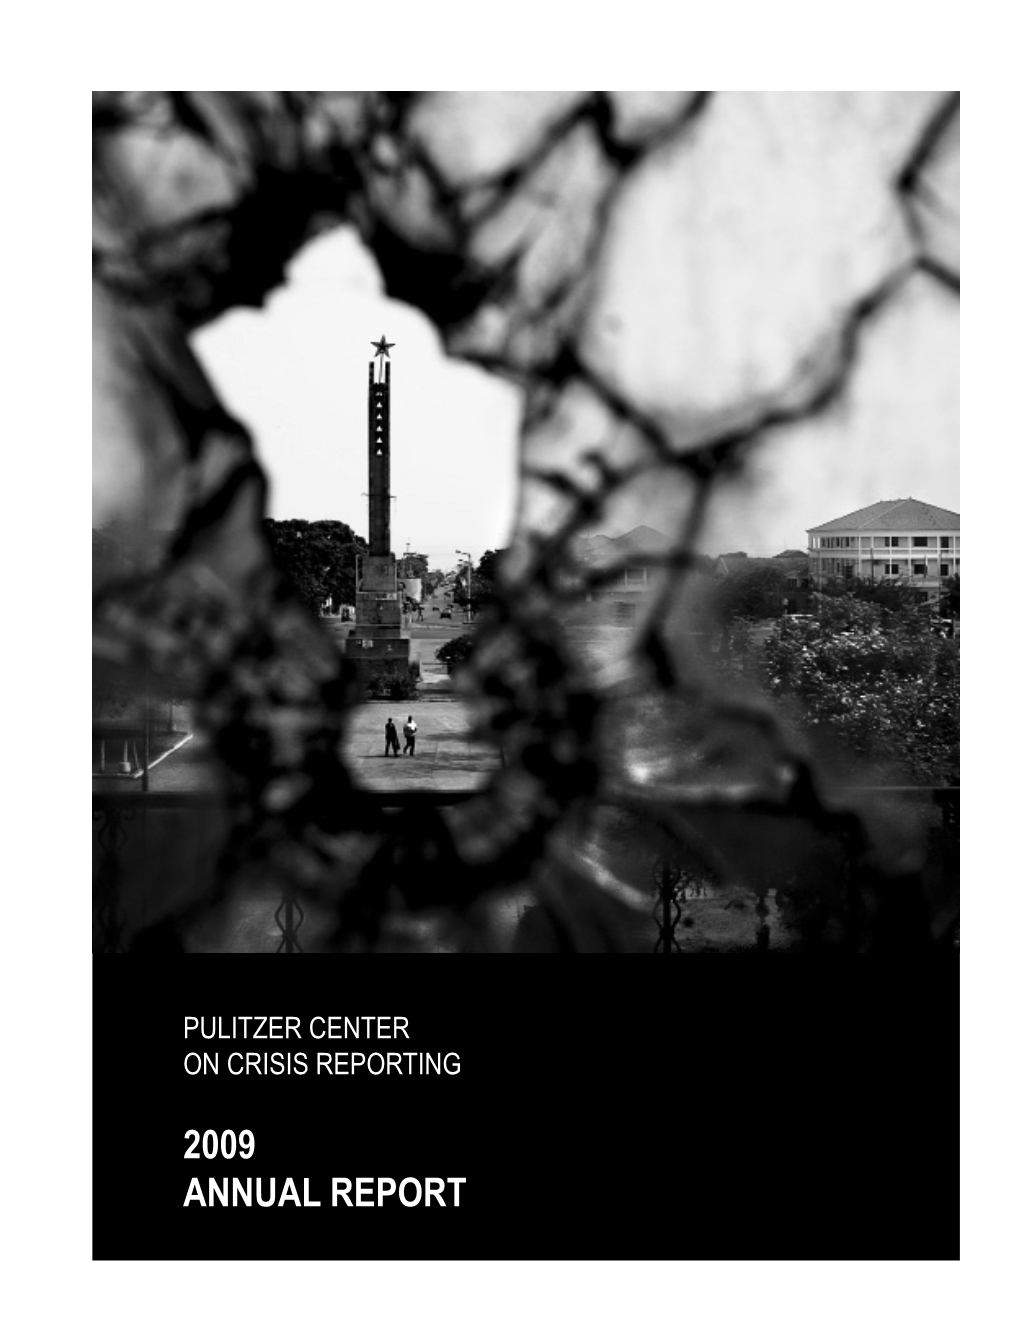 2009 ANNUAL REPORT We Will Illuminate Dark Places And, with a Deep Sense of Responsibility, Interpret These Troubled Times